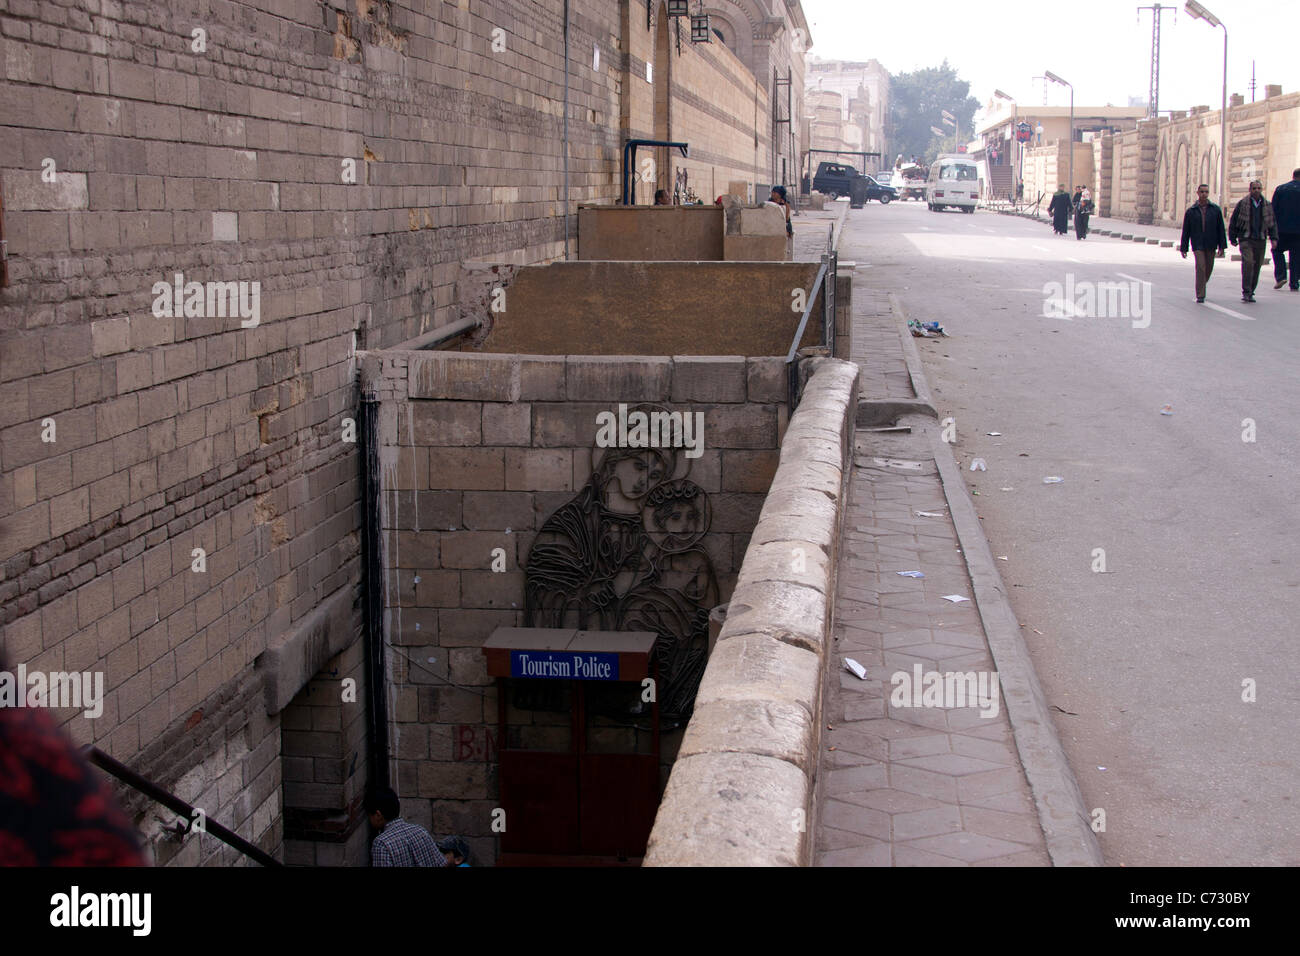 Scene outside Coptic area in Egypt, entering the area from the main road through a down staircase connecting to monuments. Stock Photo